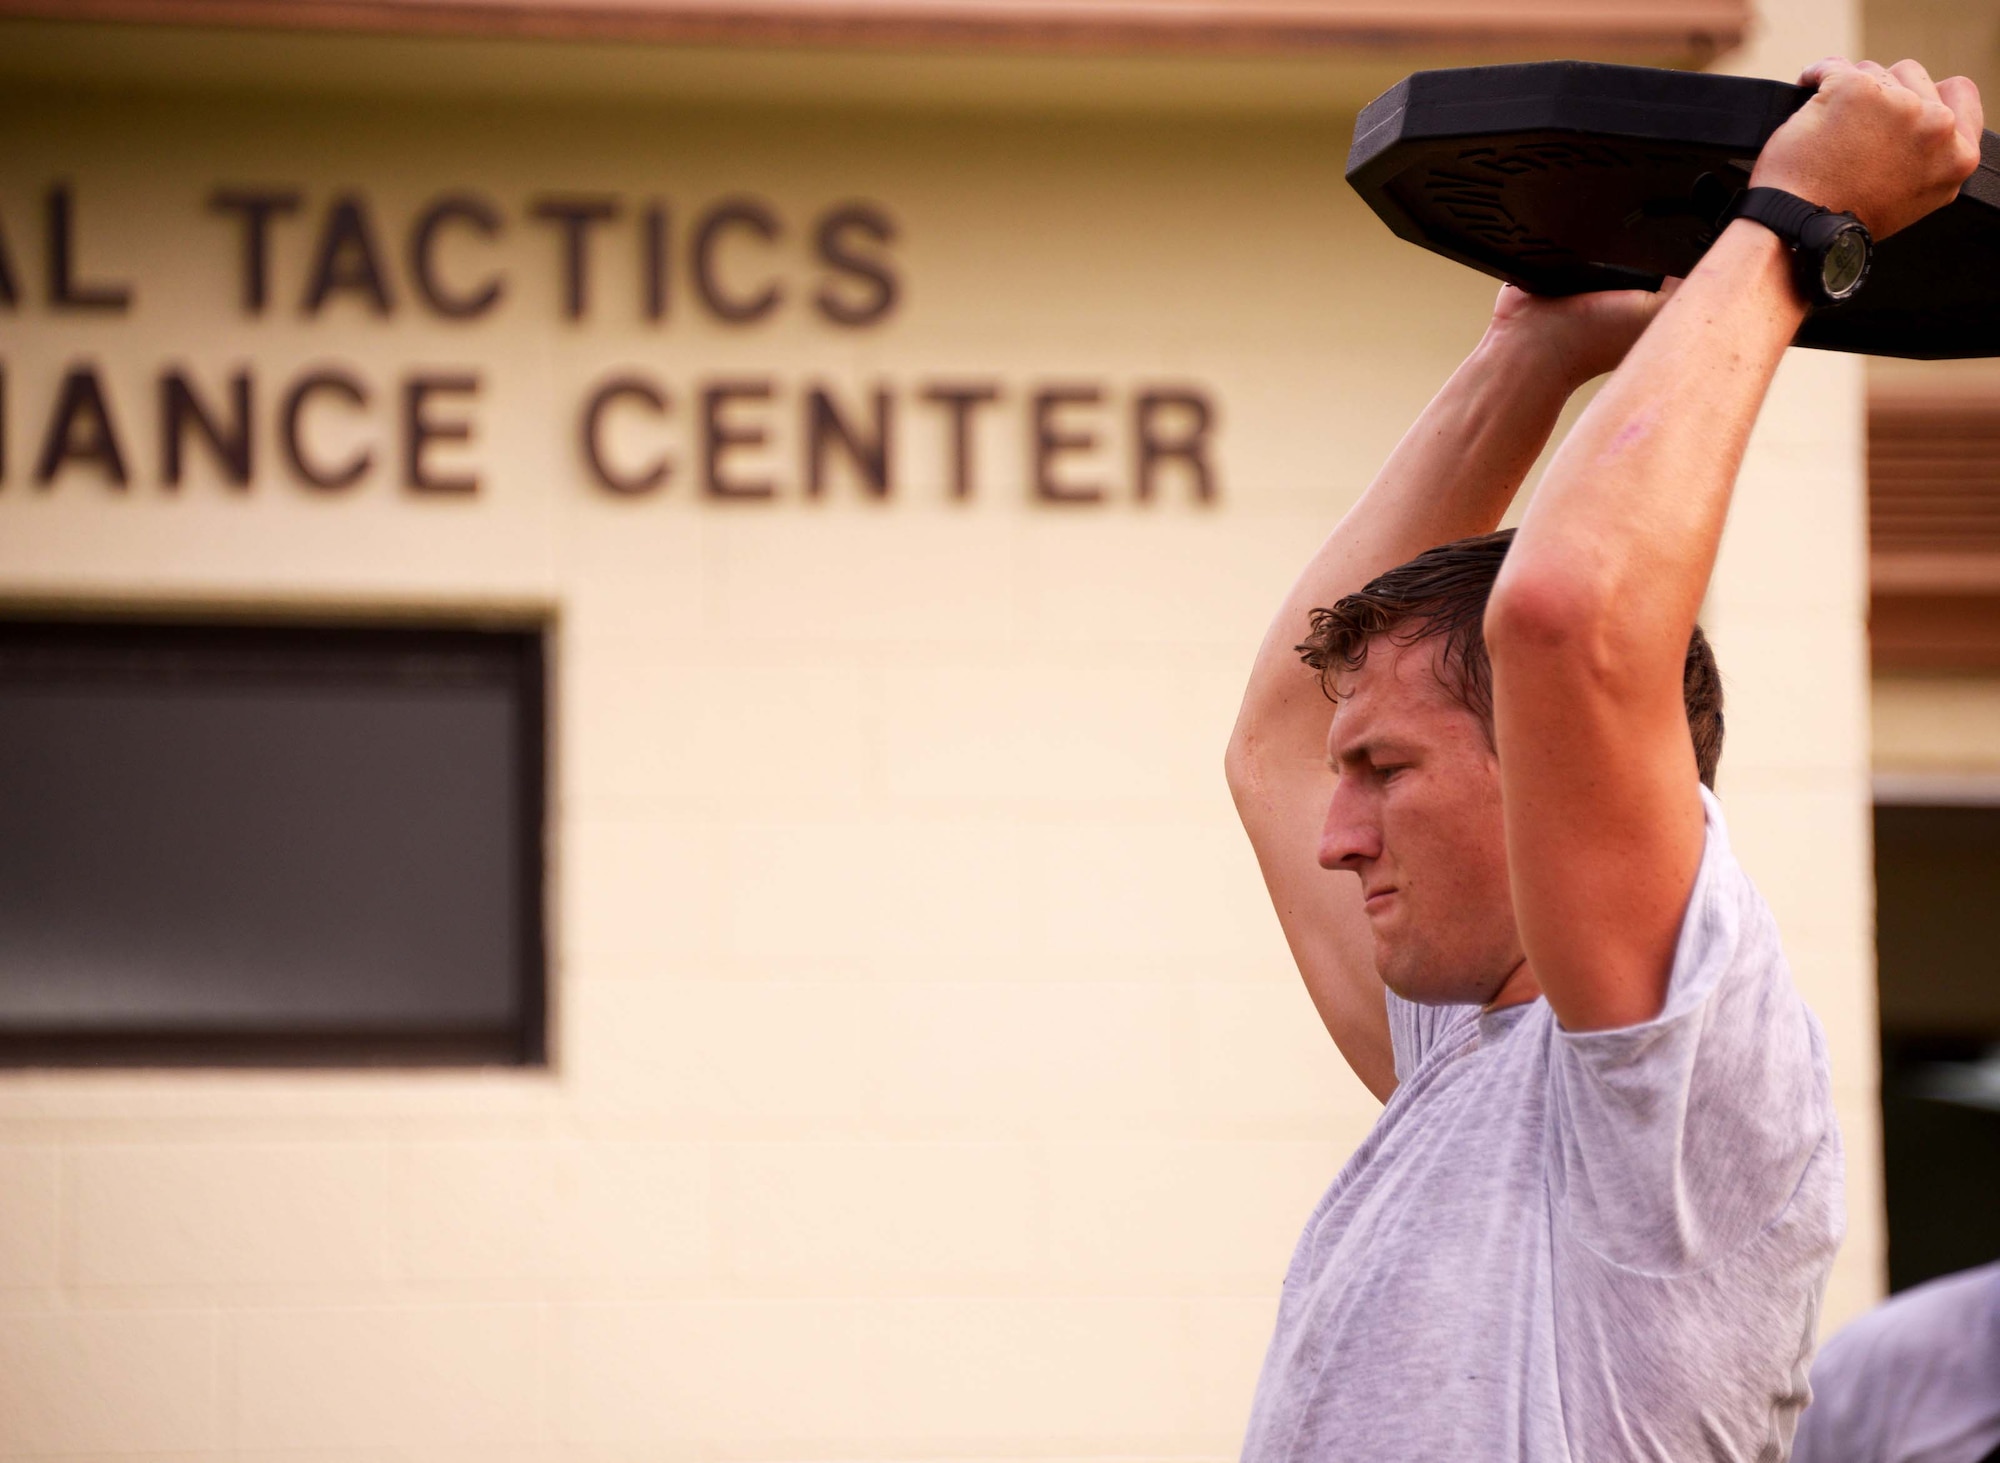 Senior Airman Keaton Thiem, 320th Special Tactics Squadron, works out in front of Human Performance Training Center, during squadron physical training March 22 at Kadena Air Base, Japan.  The HPTC houses the human performance program, which focuses on not only strengthening the battlefield Airman physically, but also rehabilitating the individual ensuring the Air Force’s human weapons system is performing to its maximum potential for as long as possible.  (U.S. Air Force photo by Tech. Sgt. Kristine Dreyer)